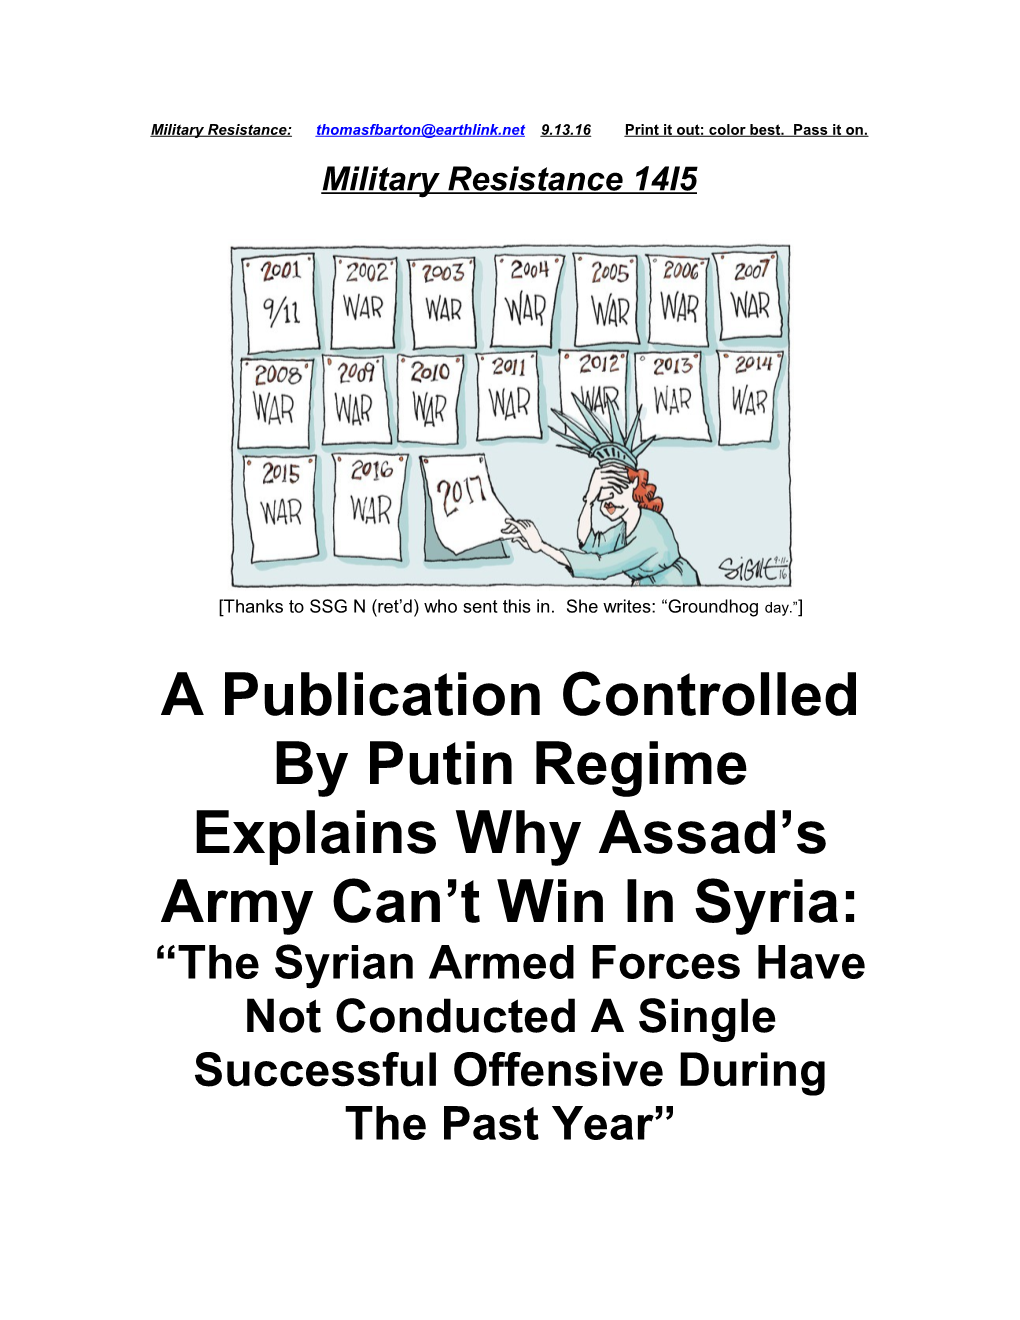 A Publication Controlled by Putin Regime Explains Why Assad S Army Can T Win in Syria